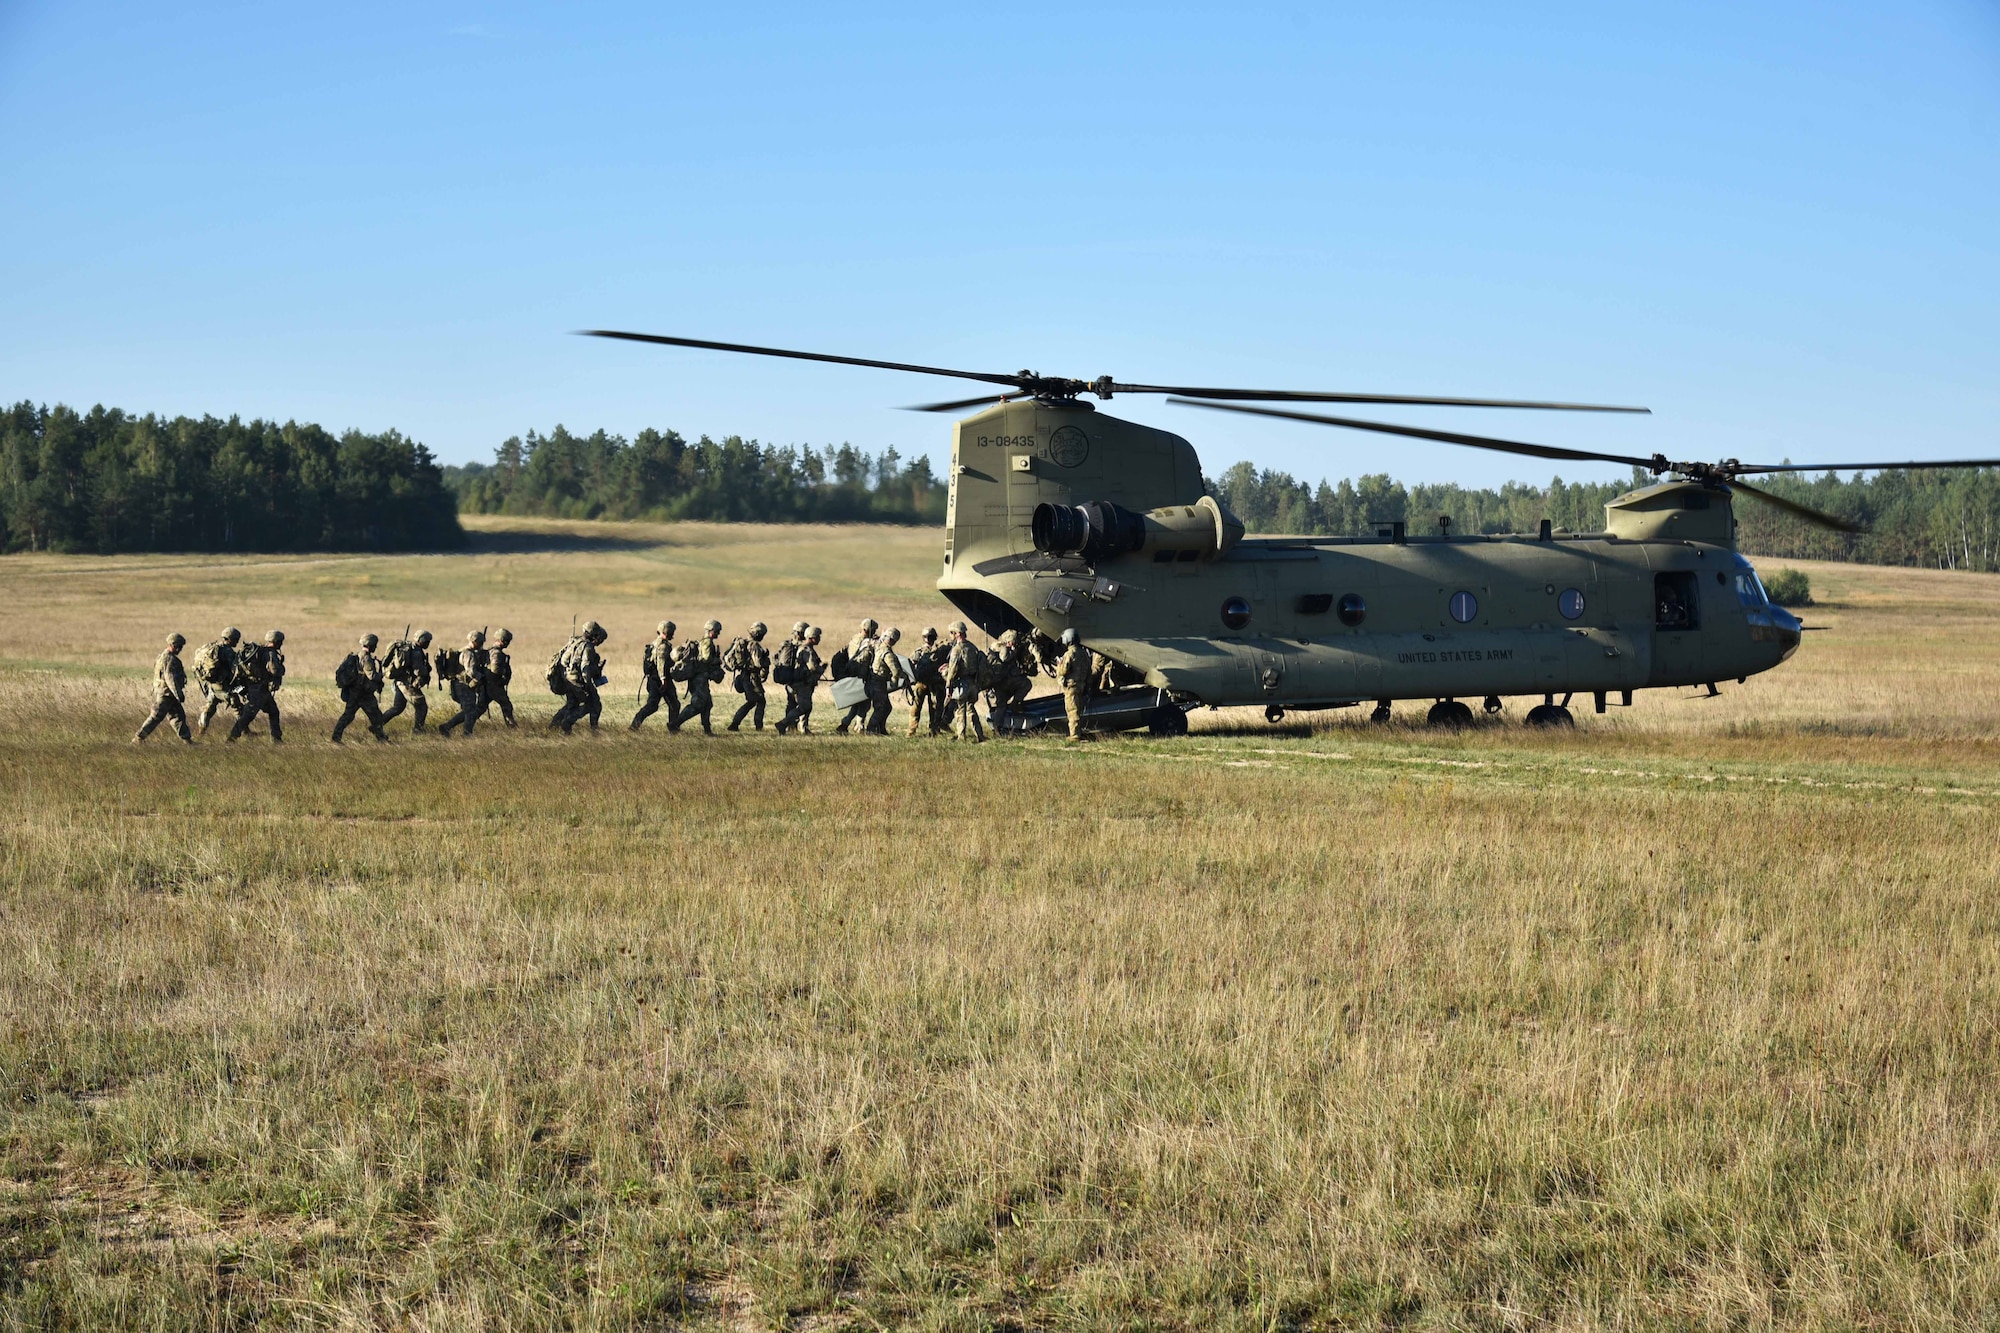 a photo of airmen lining up and going in to a helicopter